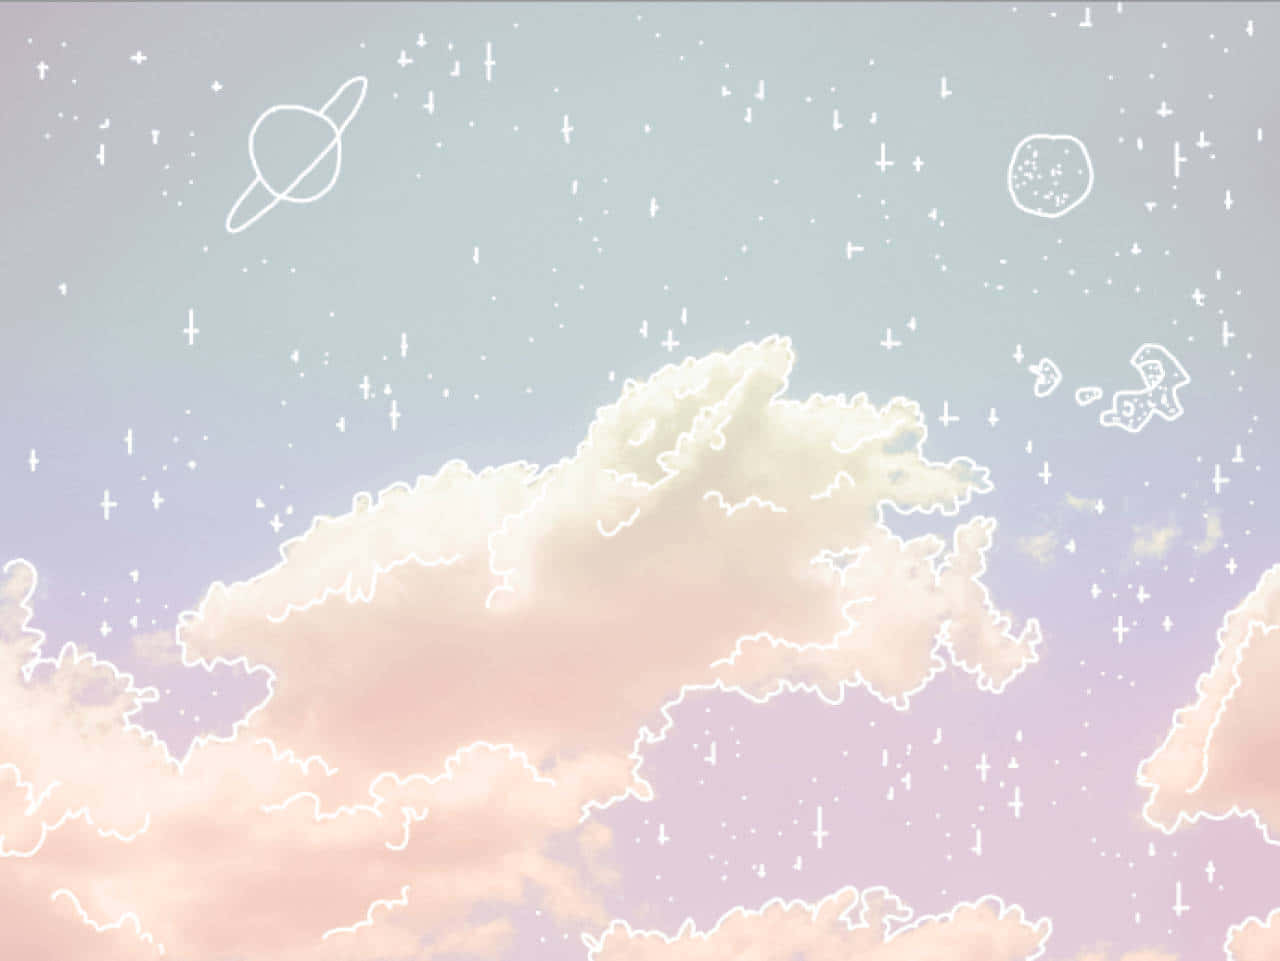 Cute Cloud With Doodles Of Stars And Planets Wallpaper